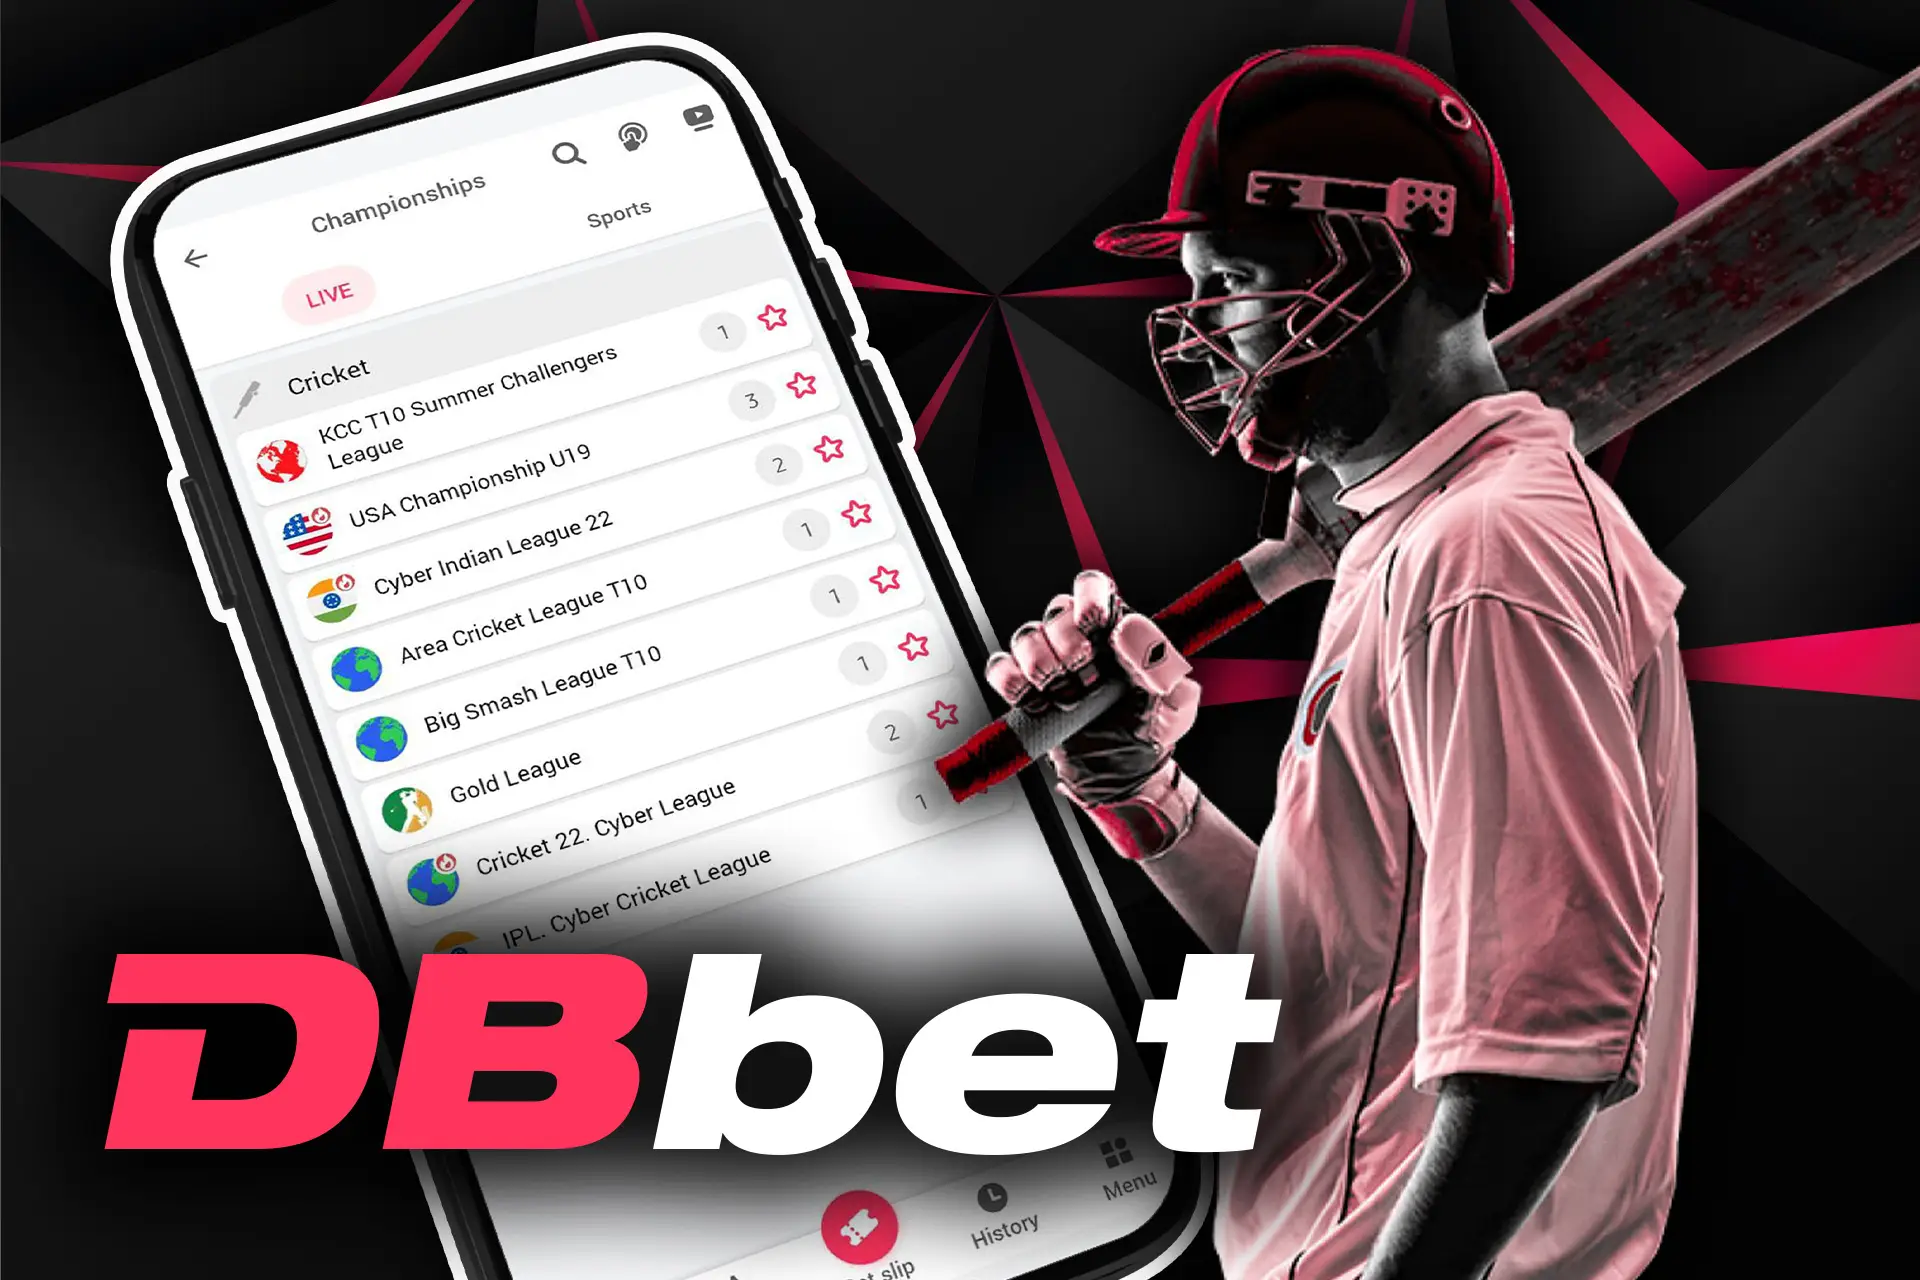 In the DBbet app, cricket betting is available to you.